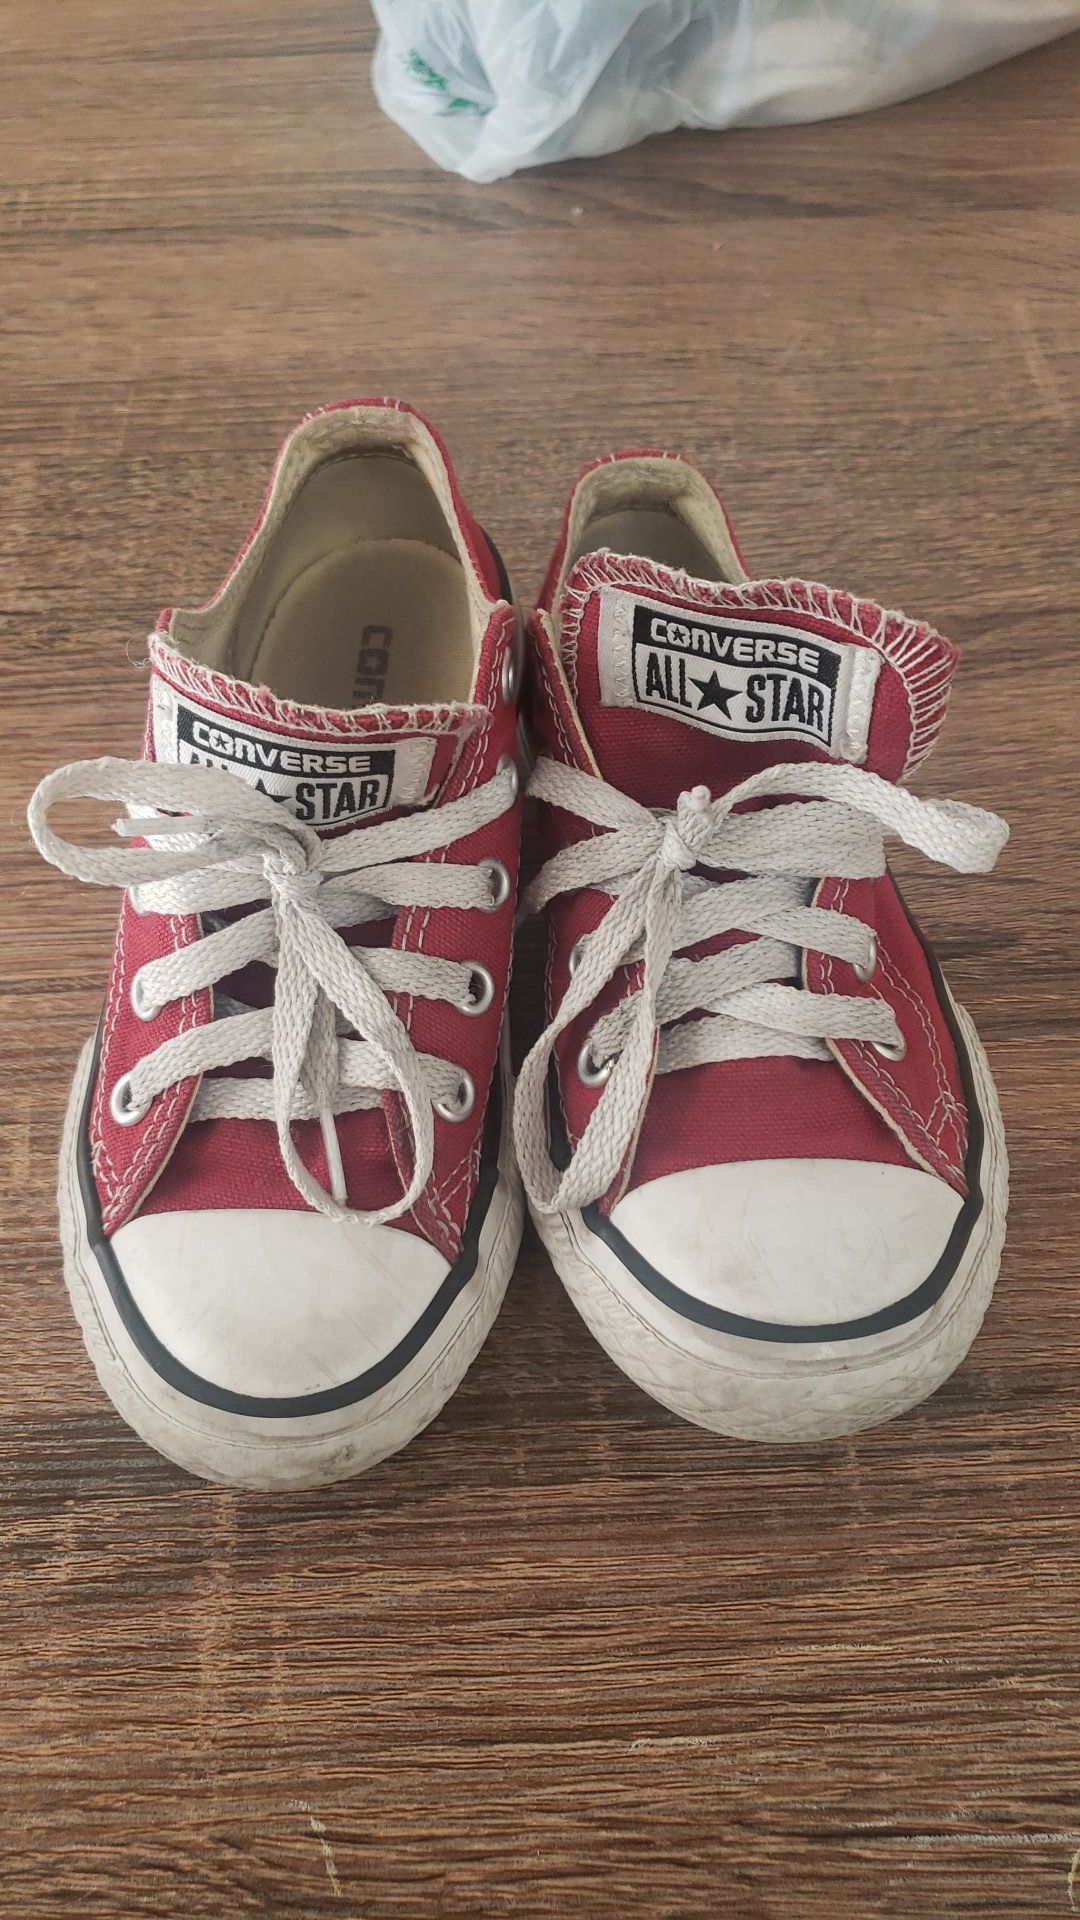 Kids Converse shoes size Sale in NV - OfferUp